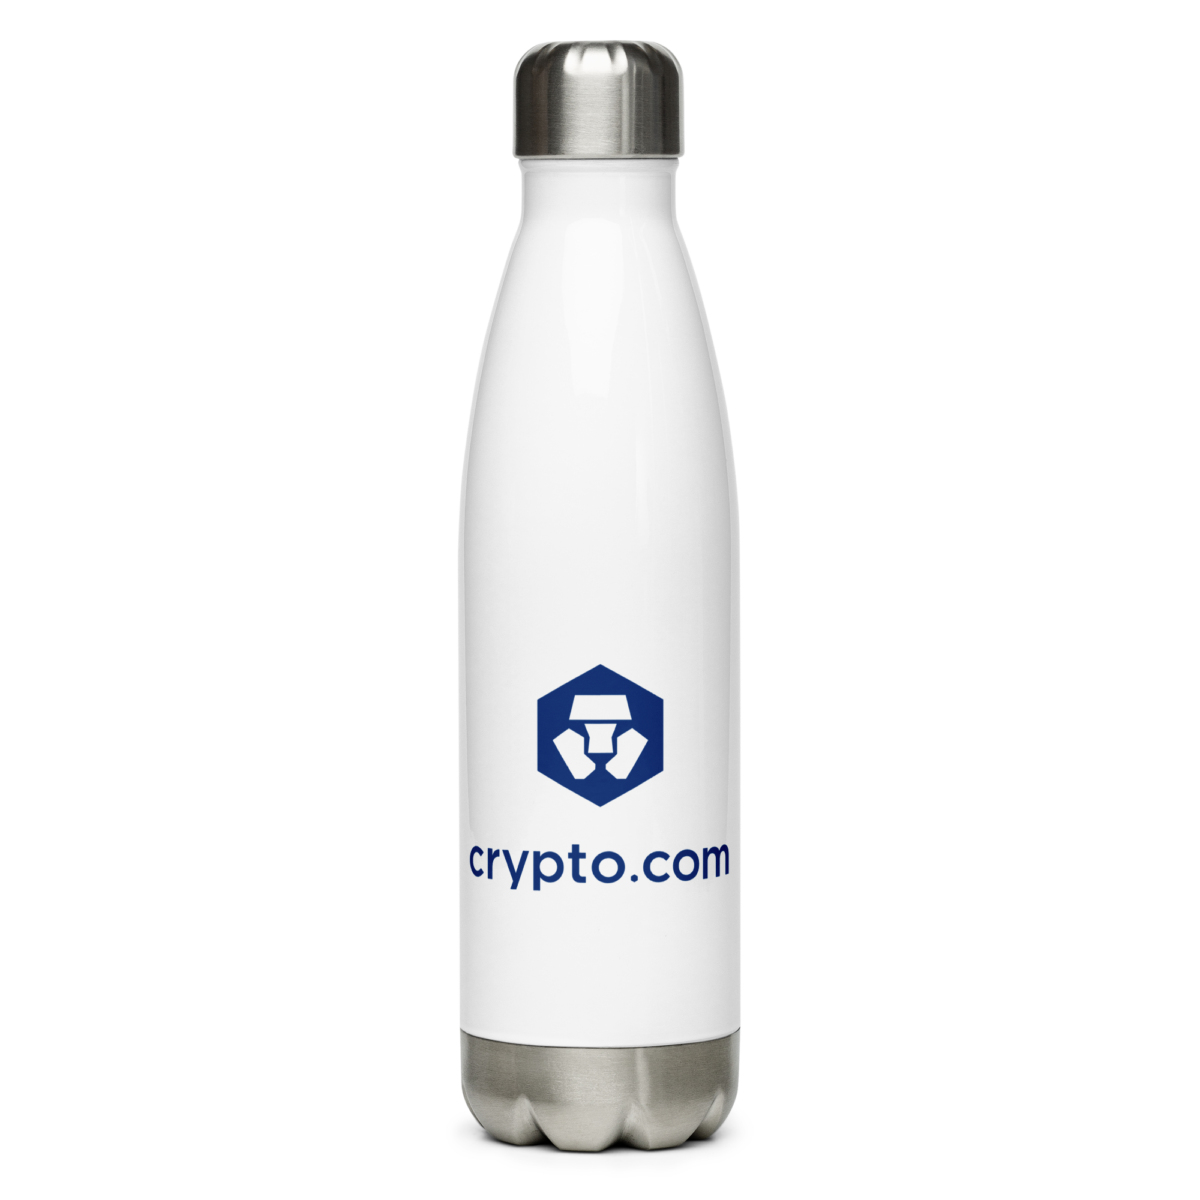 stainless steel water bottle white 17oz front 6309157f9c000 - Crypto.com Stainless Steel Water Bottle